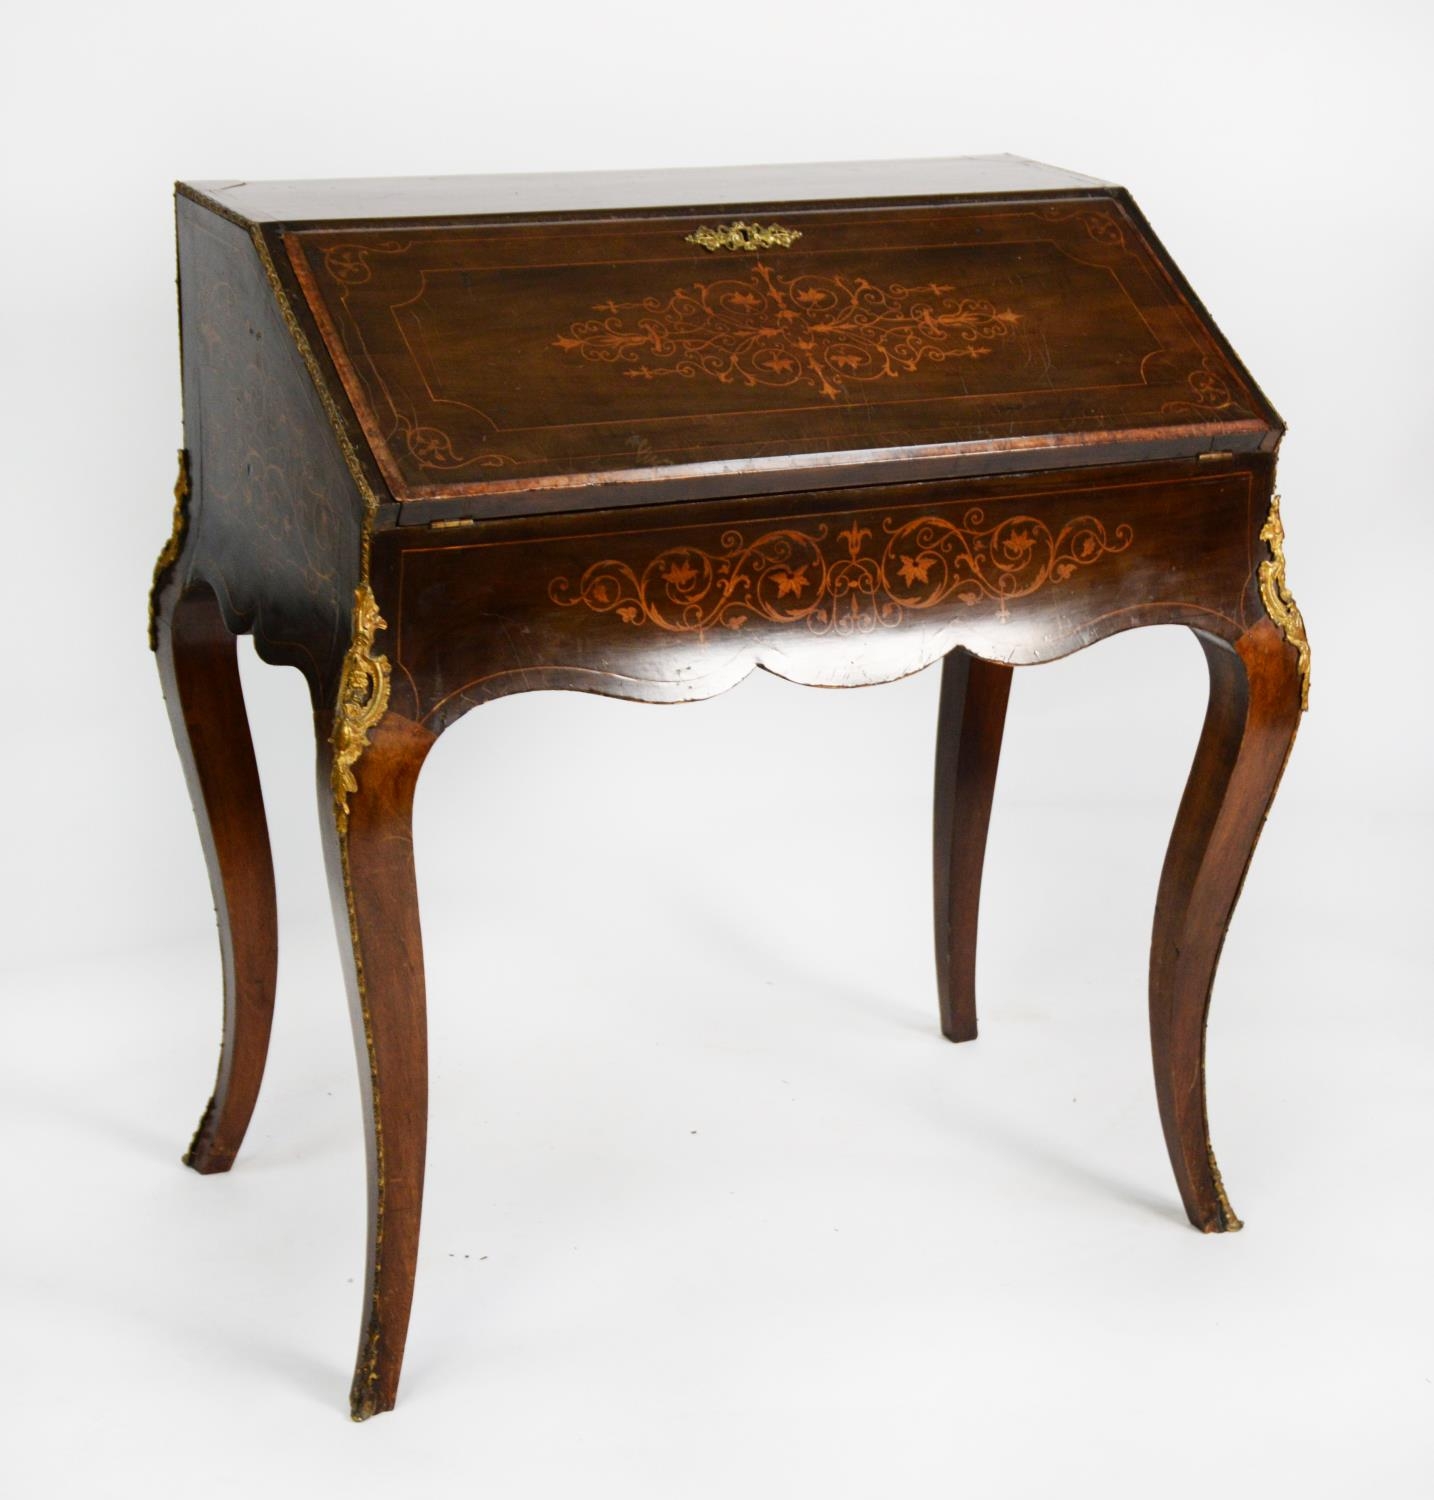 LATE NINETEENTH CENTURY GILT METAL MOUNTED AND INLAID KINGWOOD BUREAU DE DAME, of typical for the - Image 5 of 6